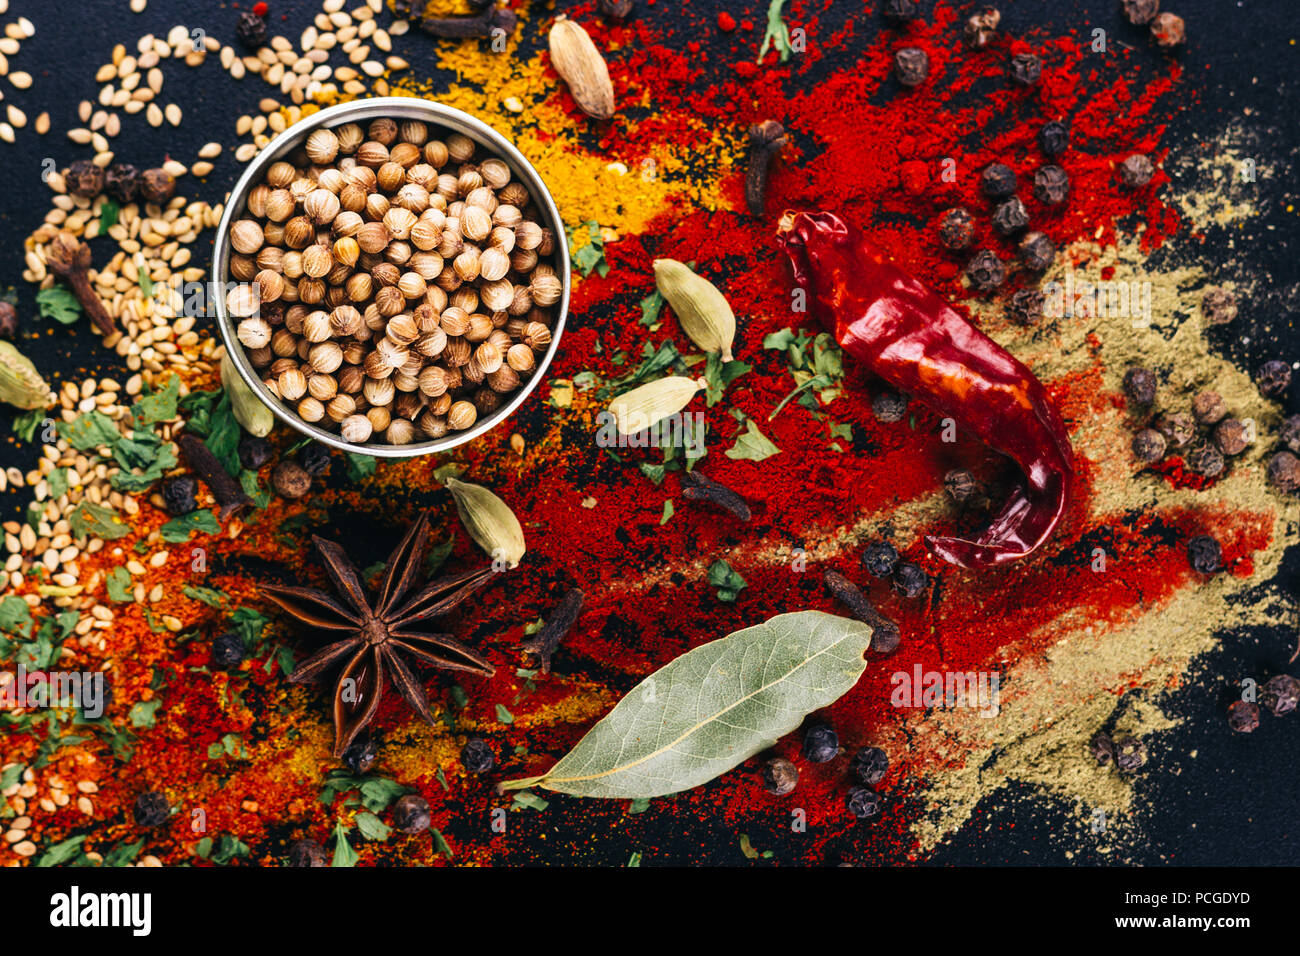 Disaster of spices and condiments for cooking, on a dark table, restaurant concept Stock Photo